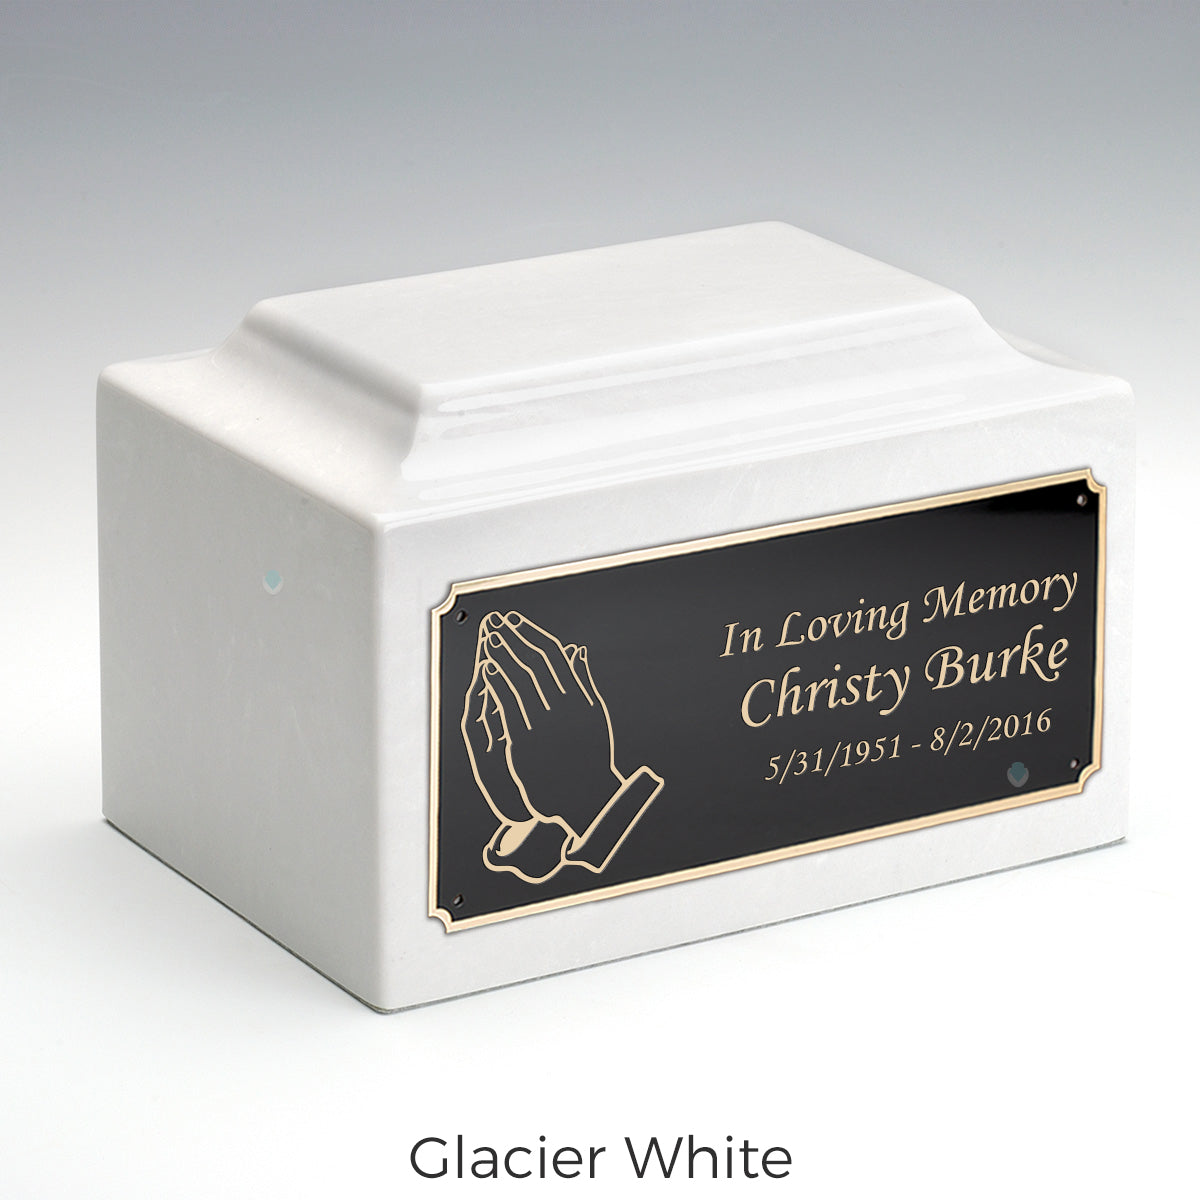 Adult Legacy Praying Hands Cultured Marble Urns by MacKenzie